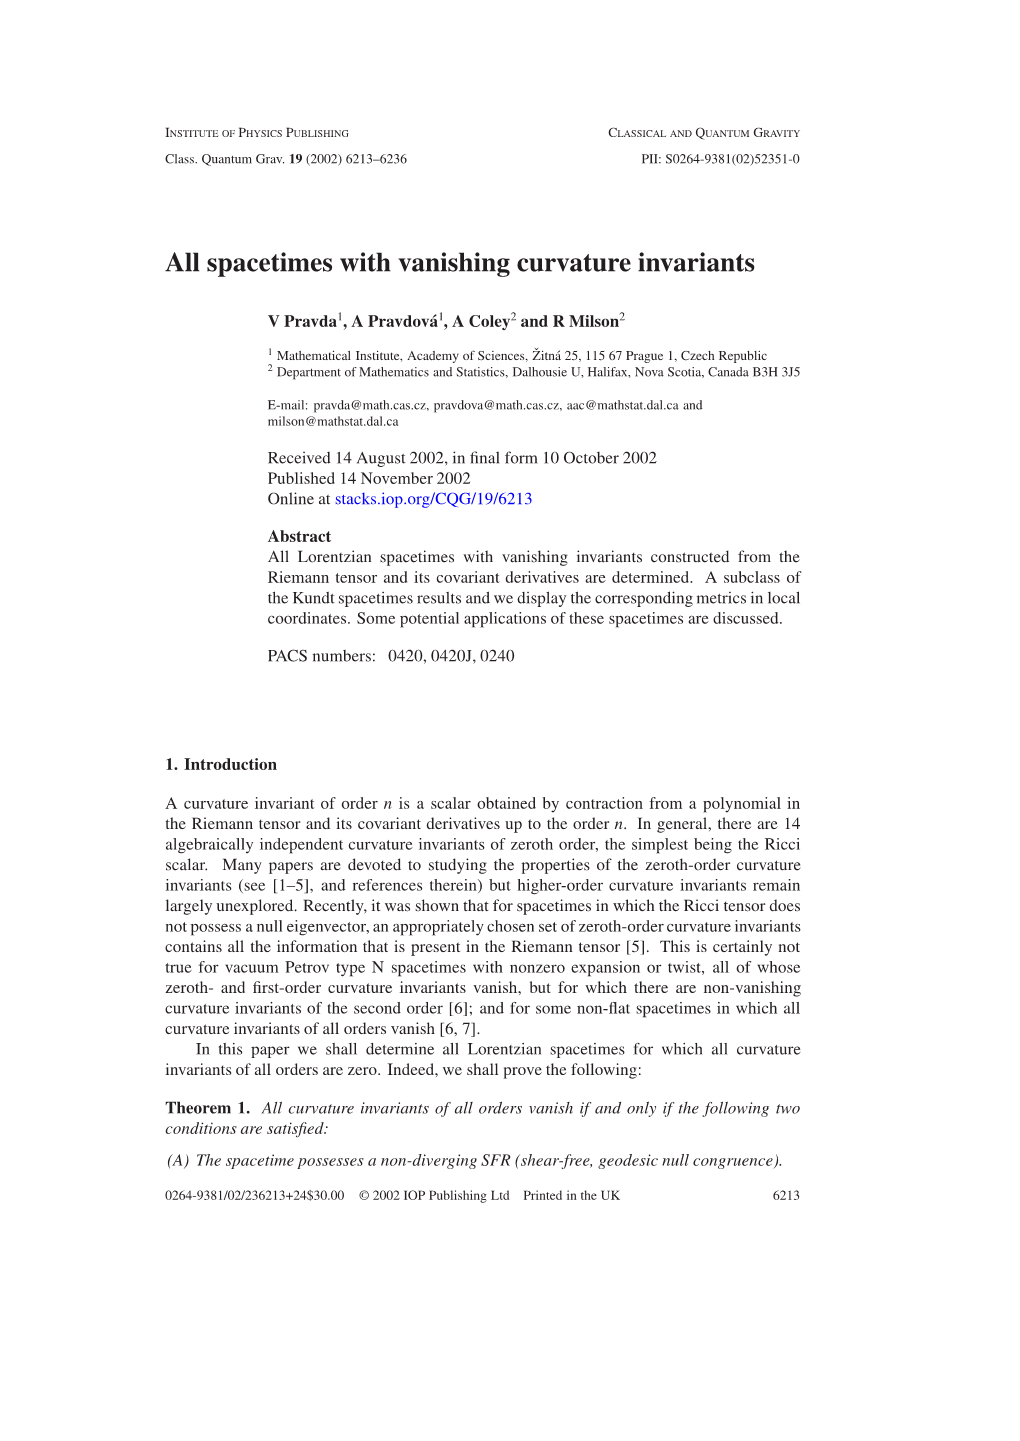 All Spacetimes with Vanishing Curvature Invariants